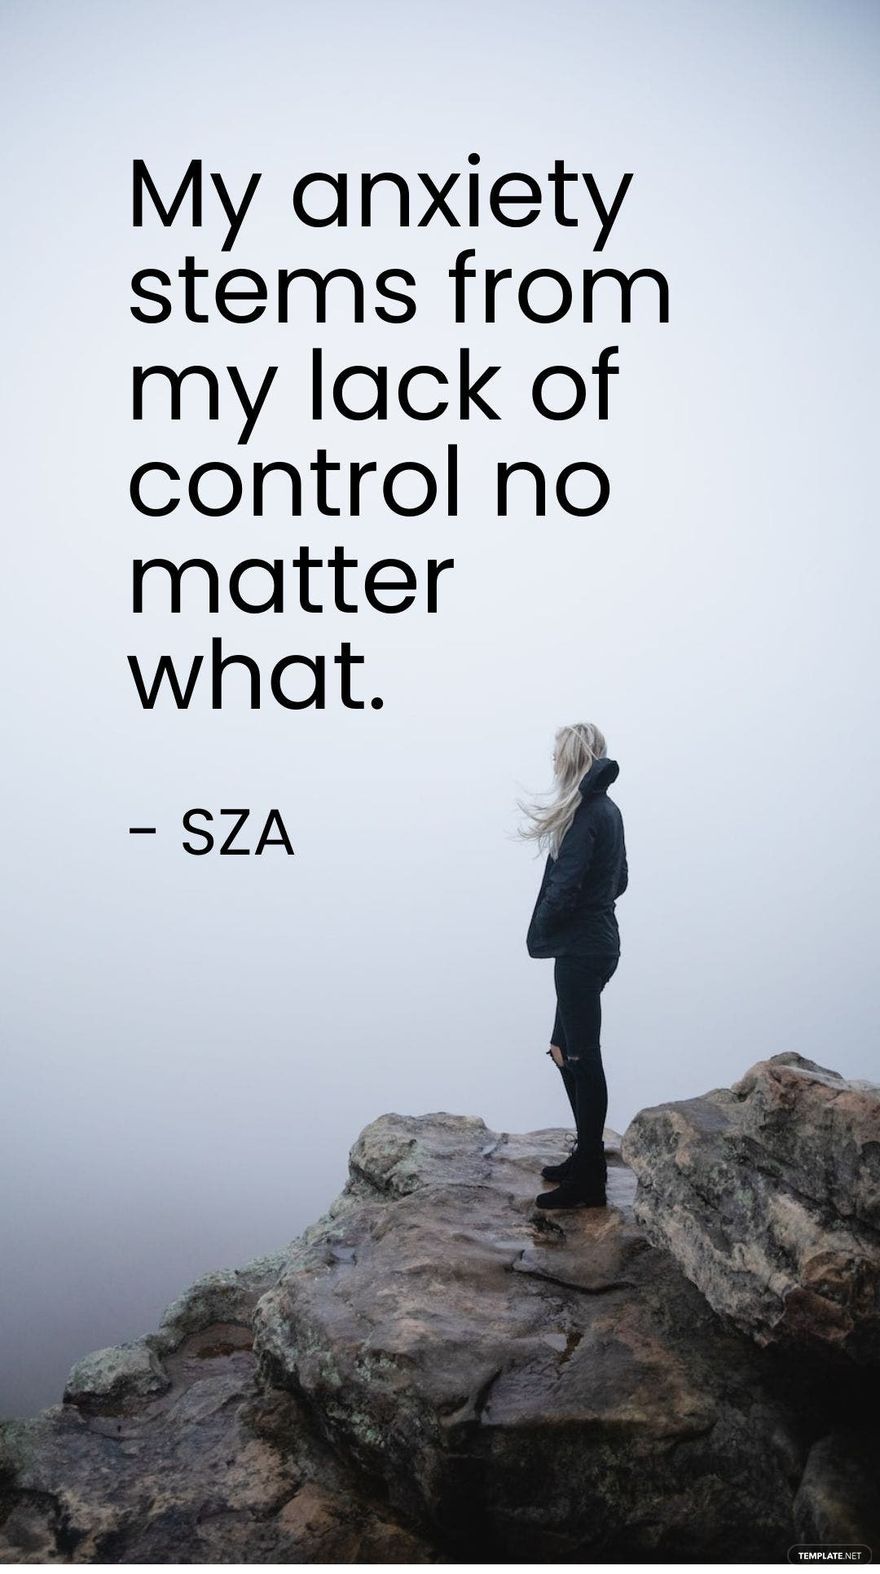 Free SZA - My anxiety stems from my lack of control no matter what. in JPG